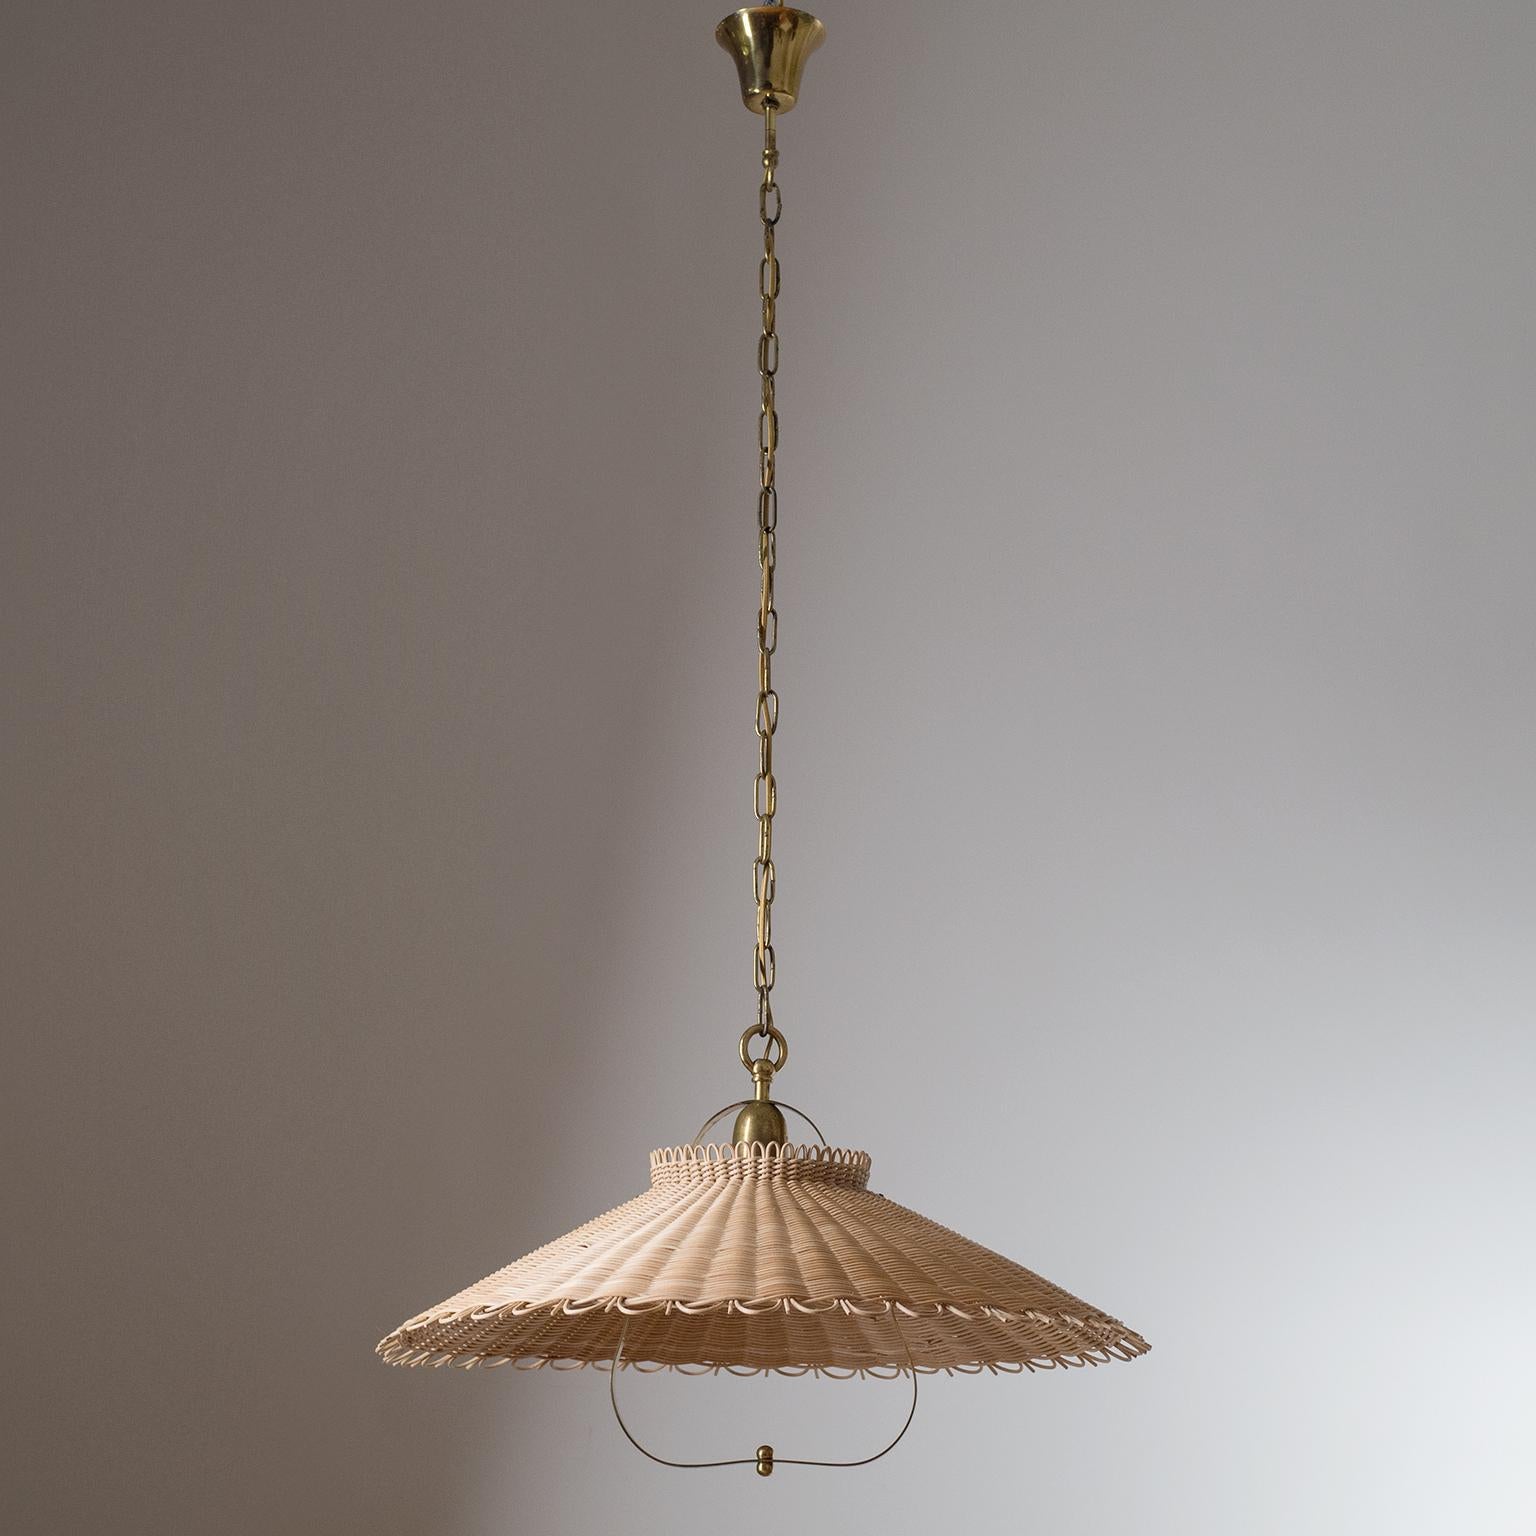 Rare large rattan pendant attributed to J.T. Kalmar, circa 1950. Large woven rattan shade with brass suspension and details. One original brass E27 socket with new wiring. Height without chain is circa 14inches/35cm.